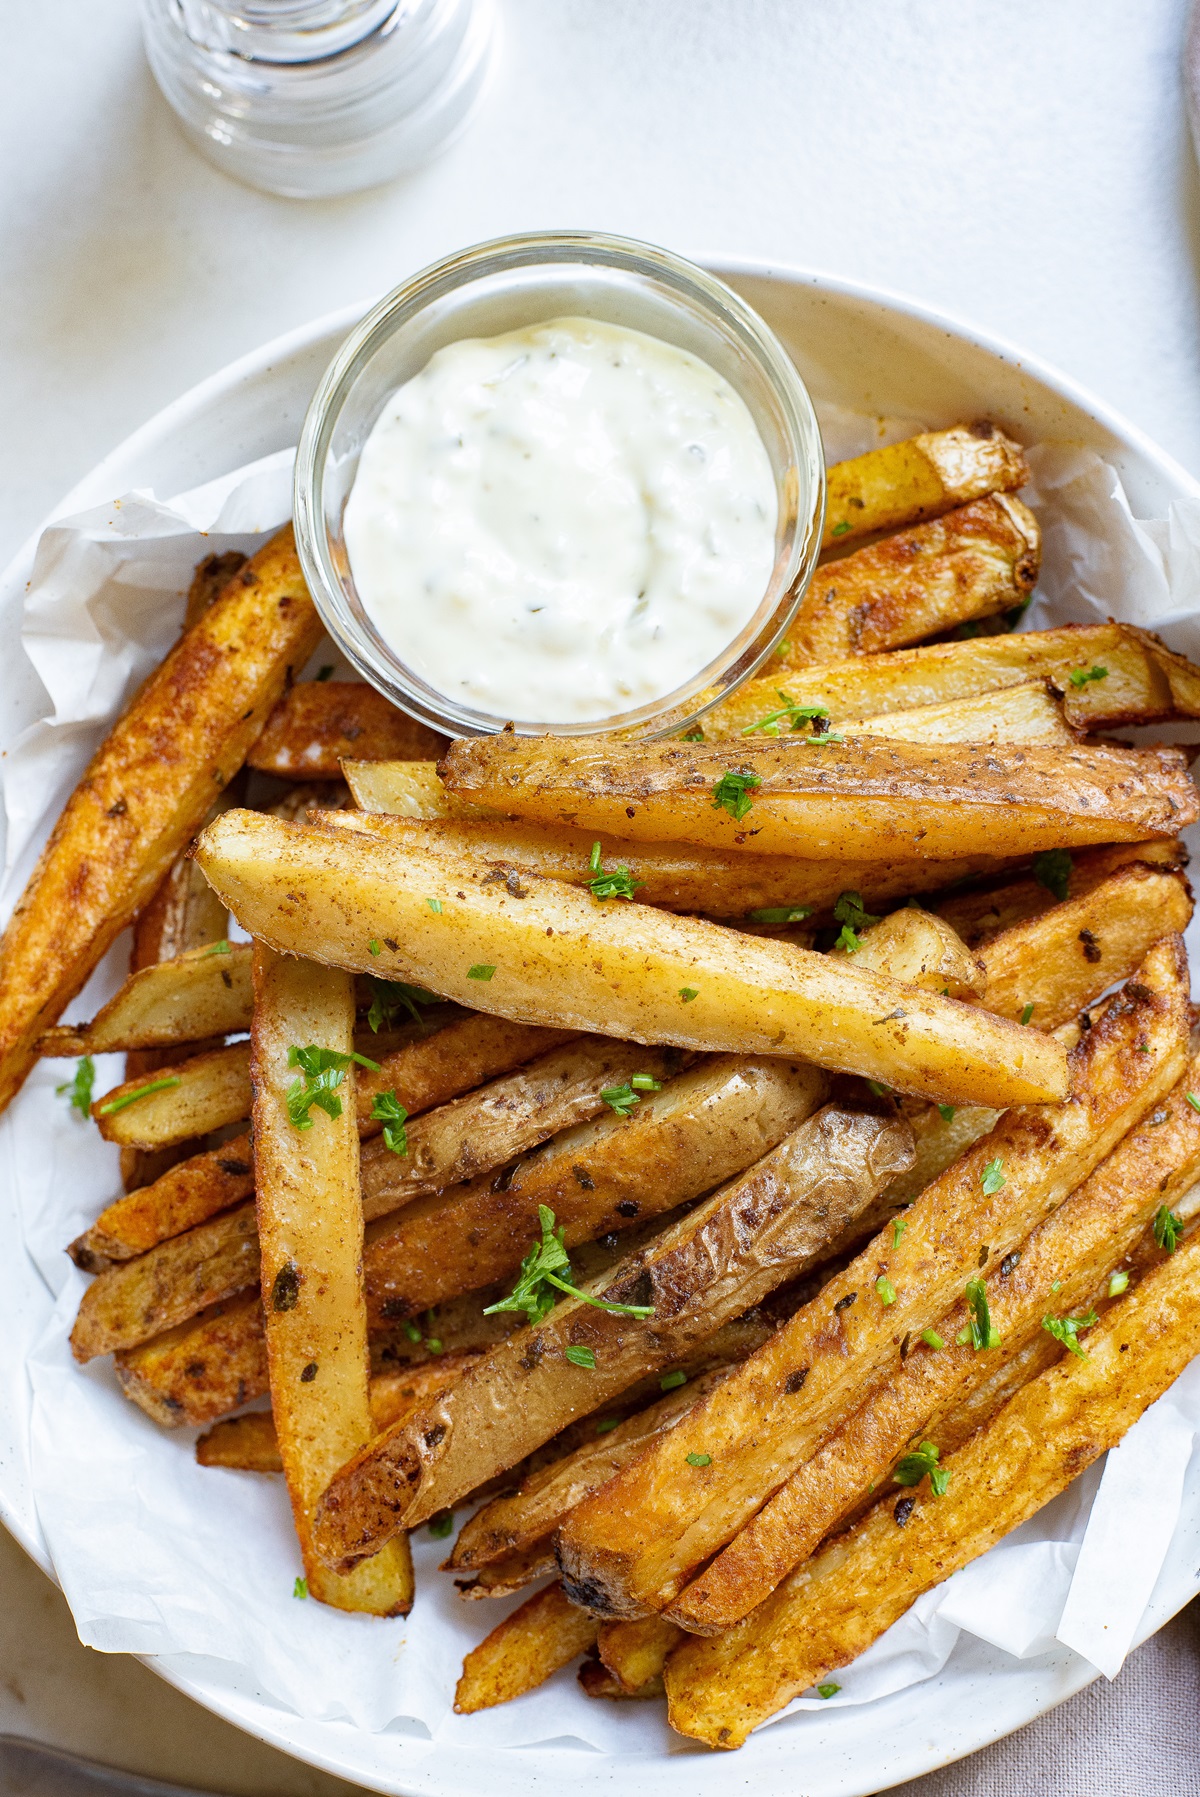 French fries in a bowl with white dipping sauce.